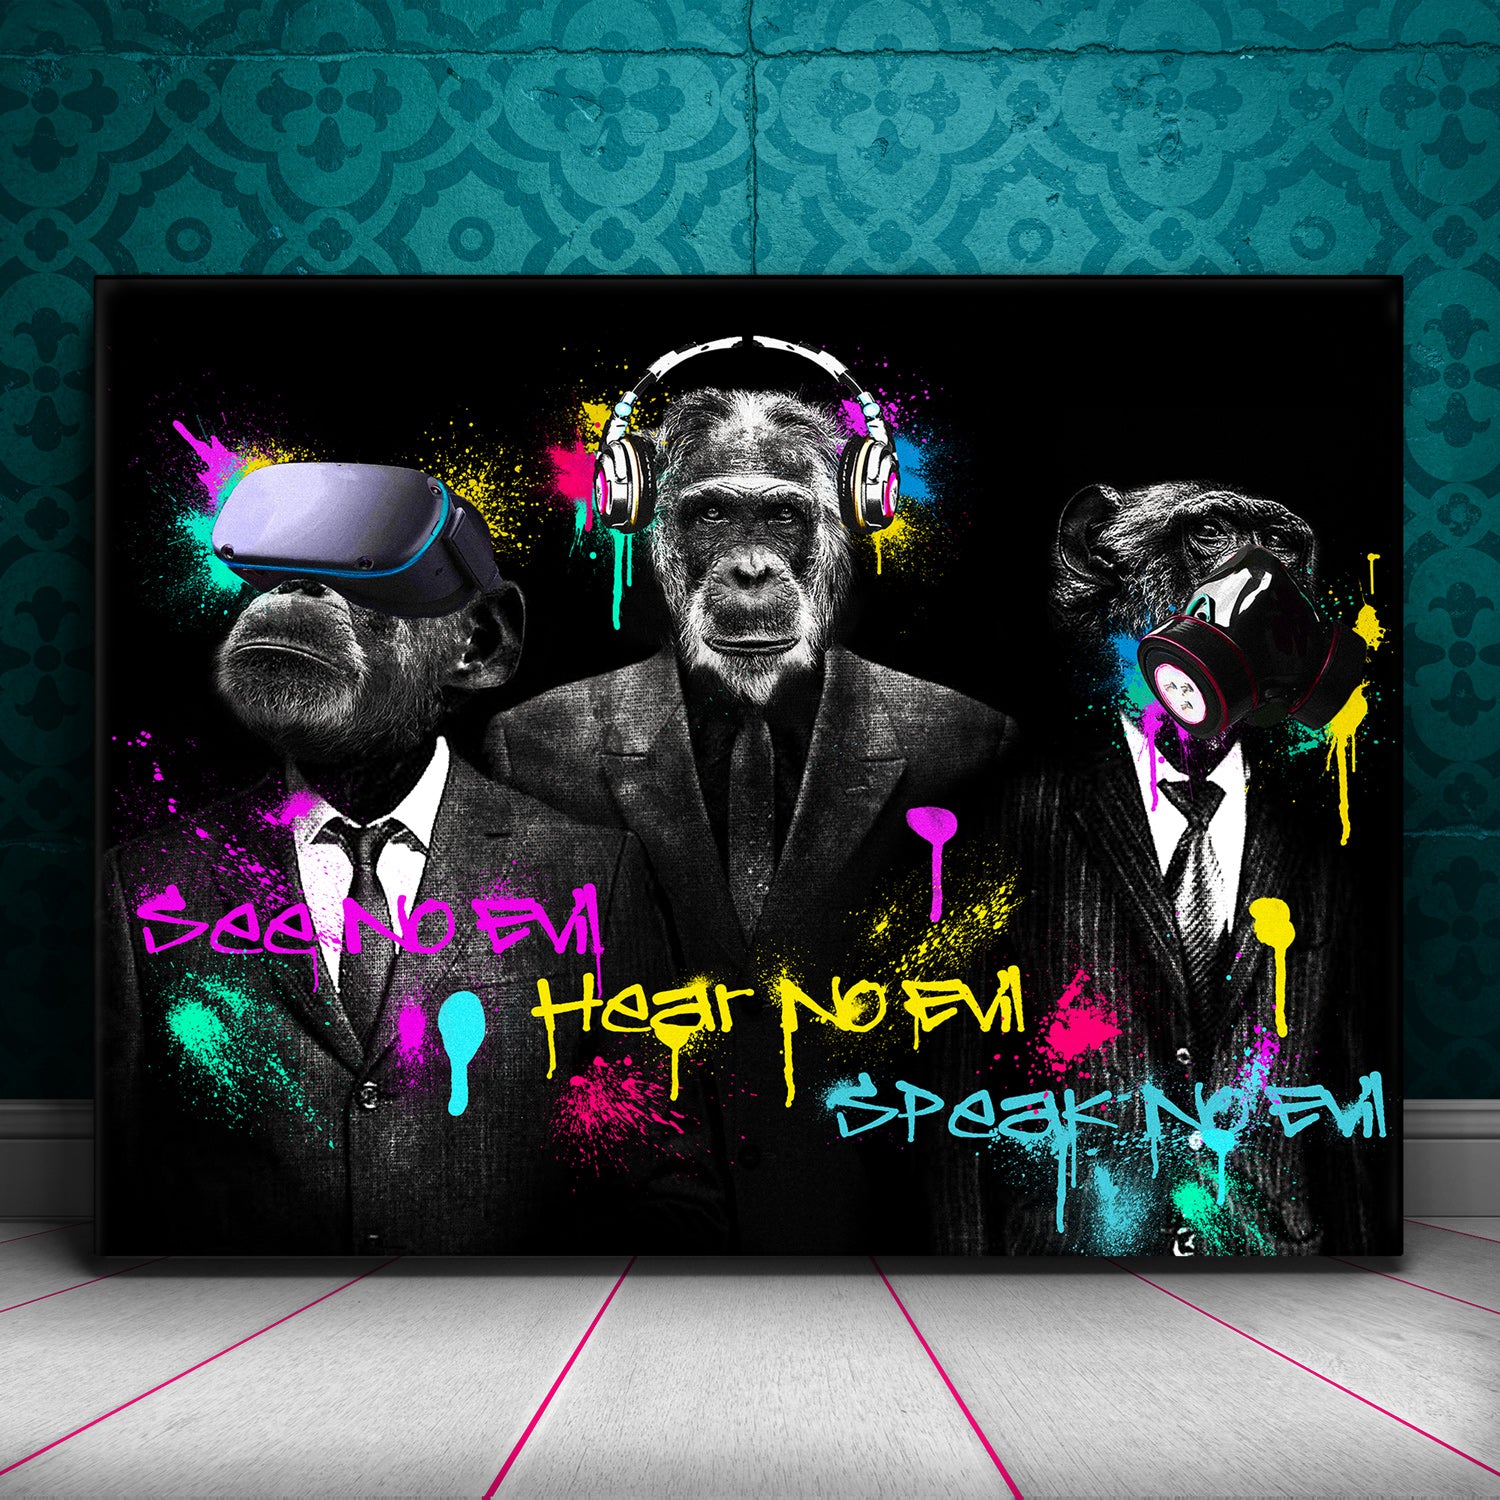 Colorful Three Wise Monkeys canvas wall art with modern take on see no evil, hear no evil, speak no evil design with a vr headset for the eye cover, premium over the ear headphones as an ear cover and gas or face mask as a mouth cover.  The monkeys are black and white and in business suits, and there is readable colorful text and paint splatters overlaid on top of them.